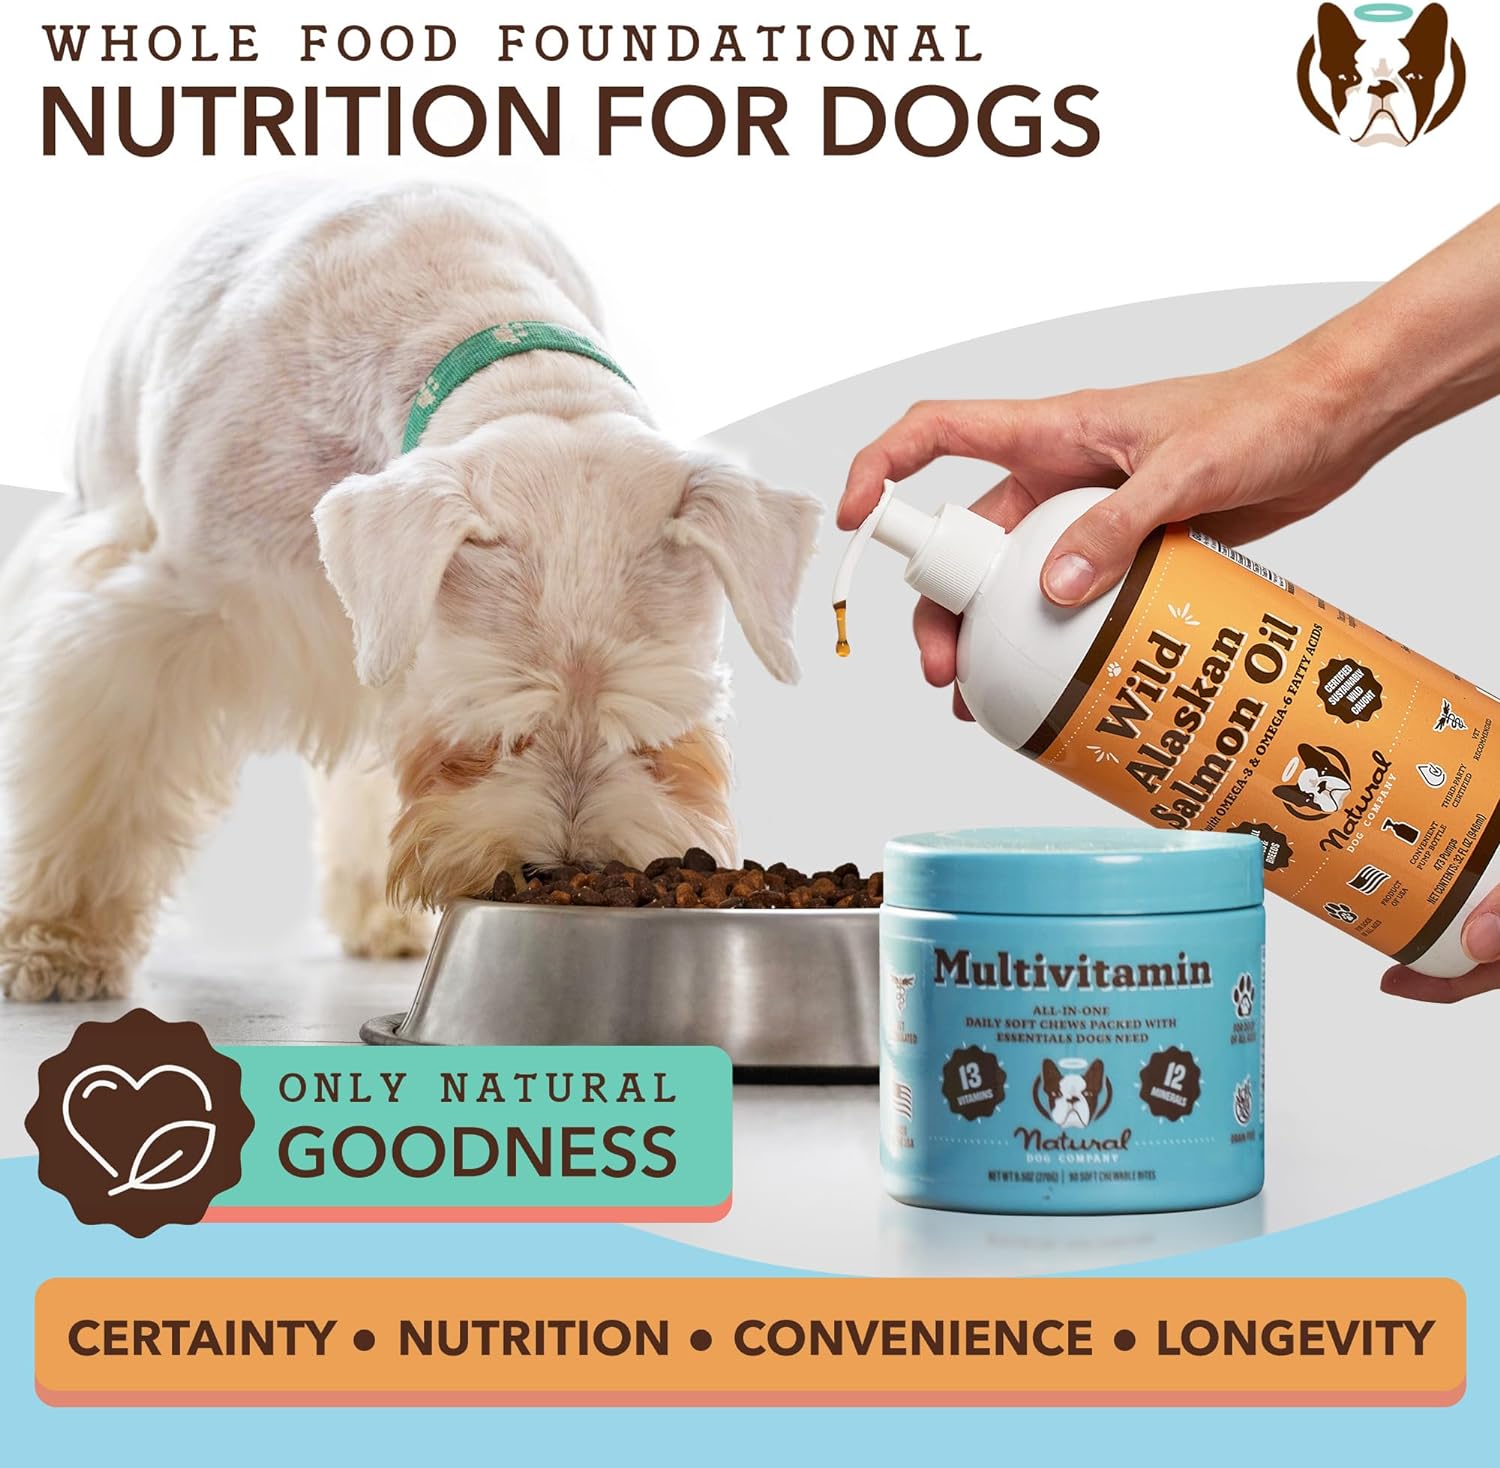 Natural Dog Company Multivitamin Chews (90 Pieces), Dog Vitamins and Supplements, Peanut Butter & Bacon Flavor, for Dogs of All Ages, Sizes, & Breeds, Supports Immune System, Antioxidant : Pet Supplies